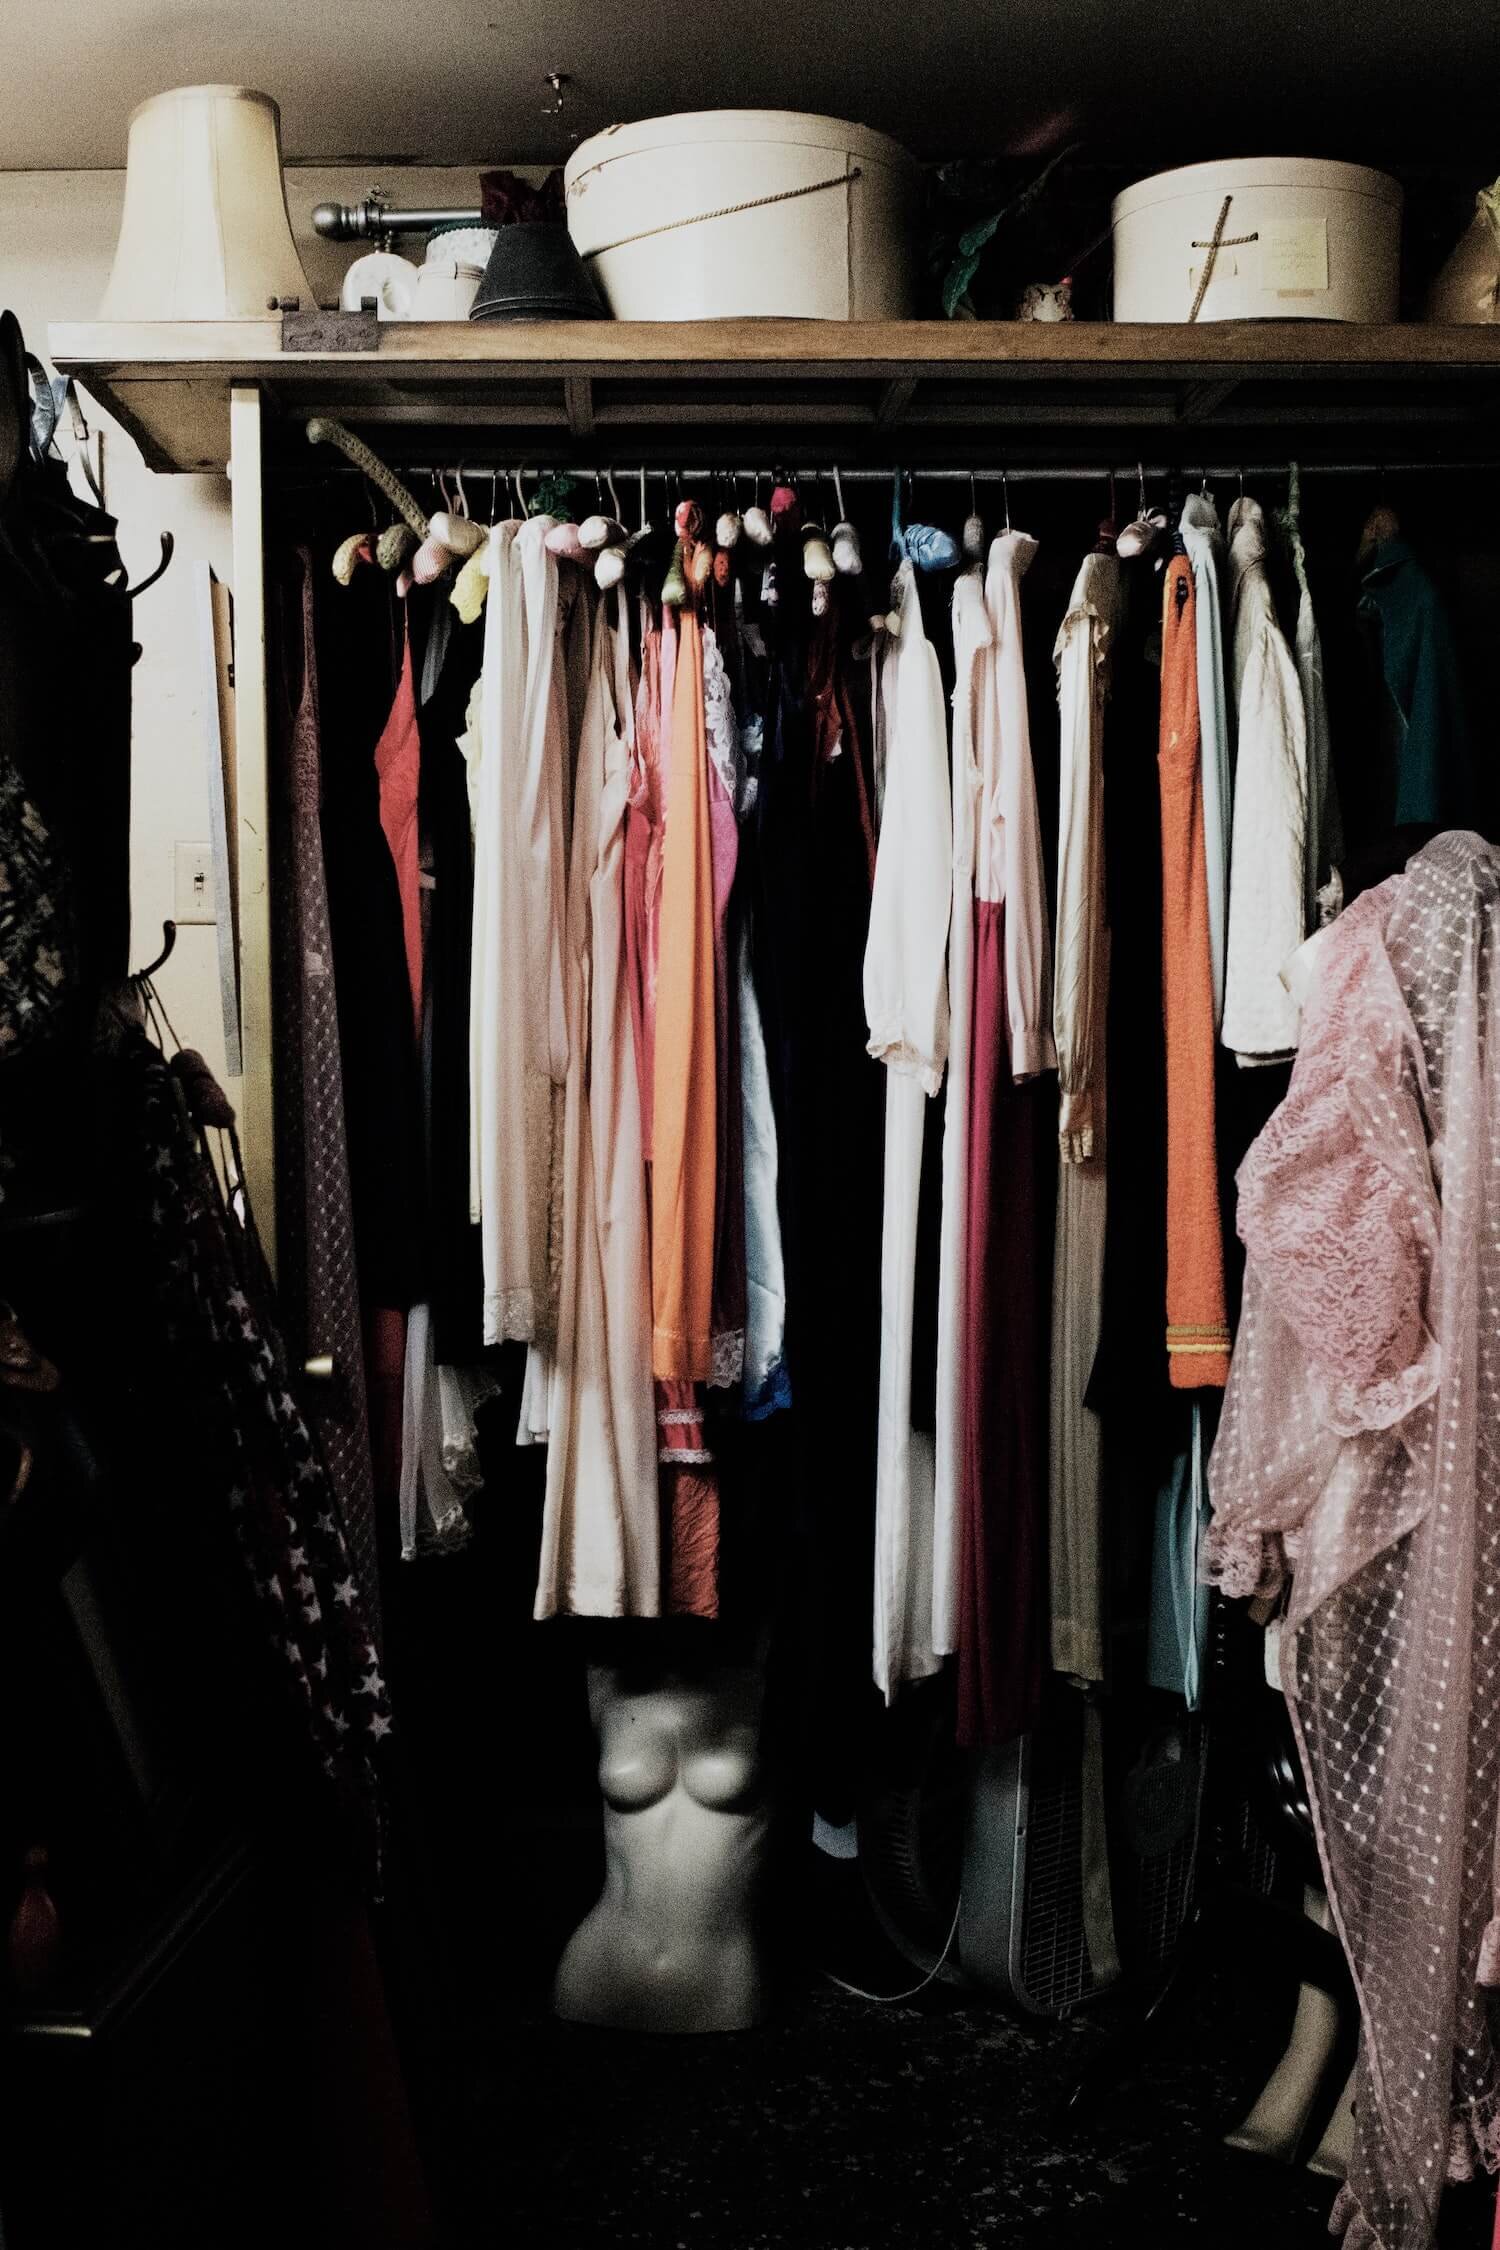 10 Steps to Launch an Online Thrift Store